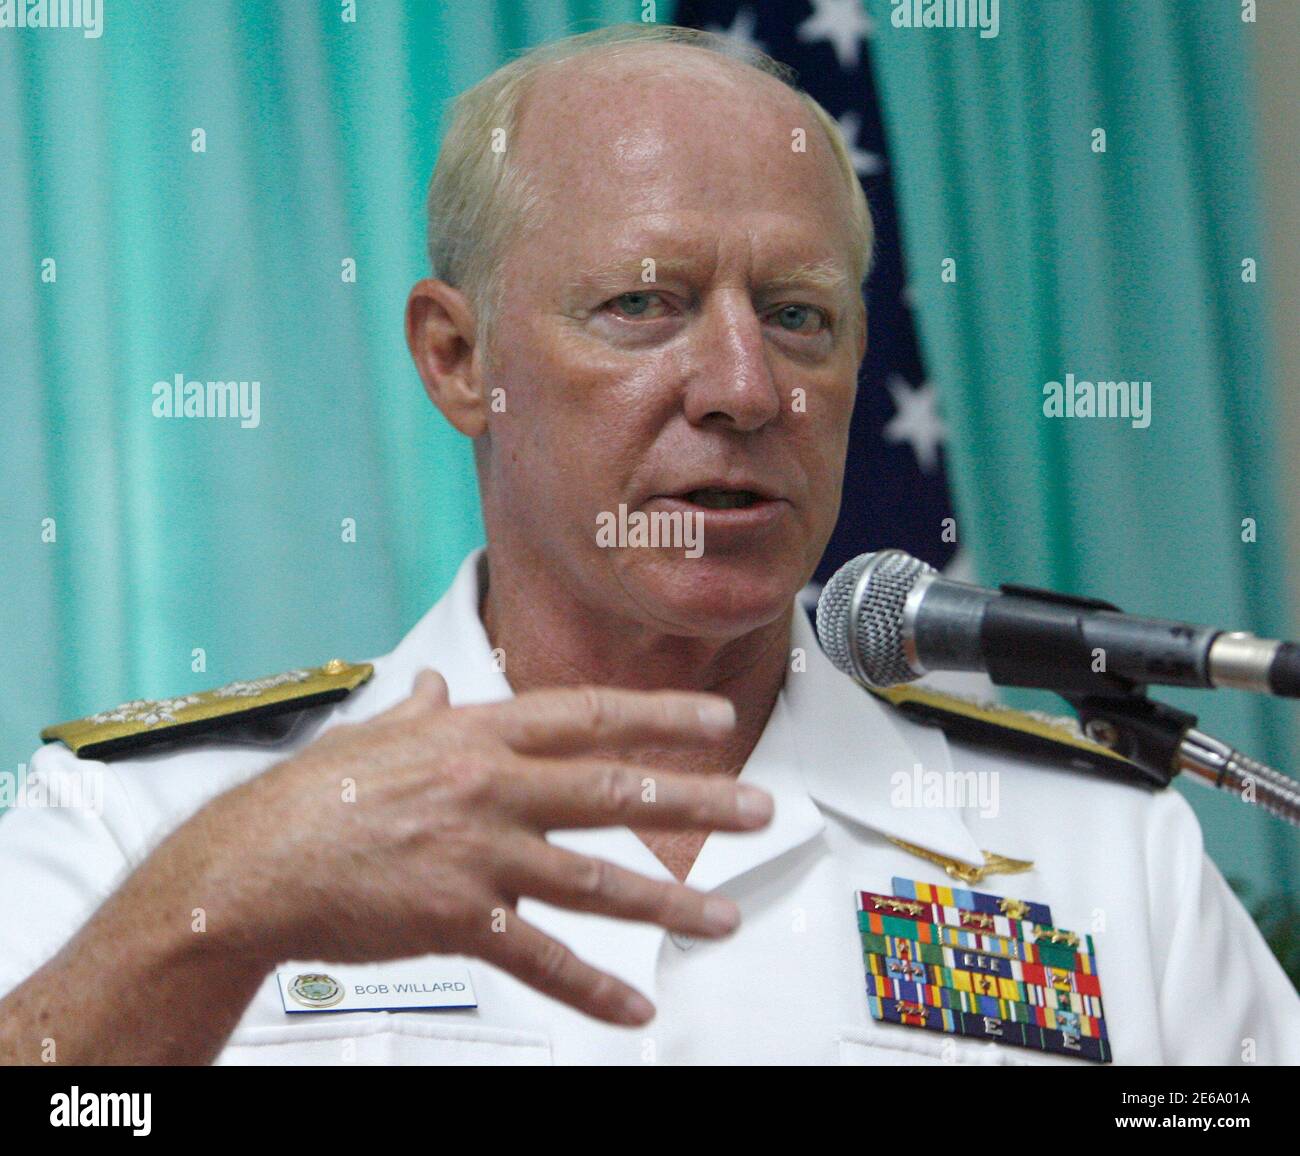 U.S. Navy Admiral Robert F. Willard, Commander of the U.S. Pacific Command, gestures after the Philippines-U.S. military annual bilateral security briefing at Camp Aguinaldo in Quezon City, Metro Manila August 18, 2010. Philippines and the United States discussed mutual security concerns as well as non-traditional defense issues including regional security challenges, maritime security, combating terrorism, mutual defense, humanitarian assistance/disaster response, global peace operations initiative, and transnational crimes,  according to an AFP press release.  REUTERS/Cheryl Ravelo (PHILIPPI Stock Photo